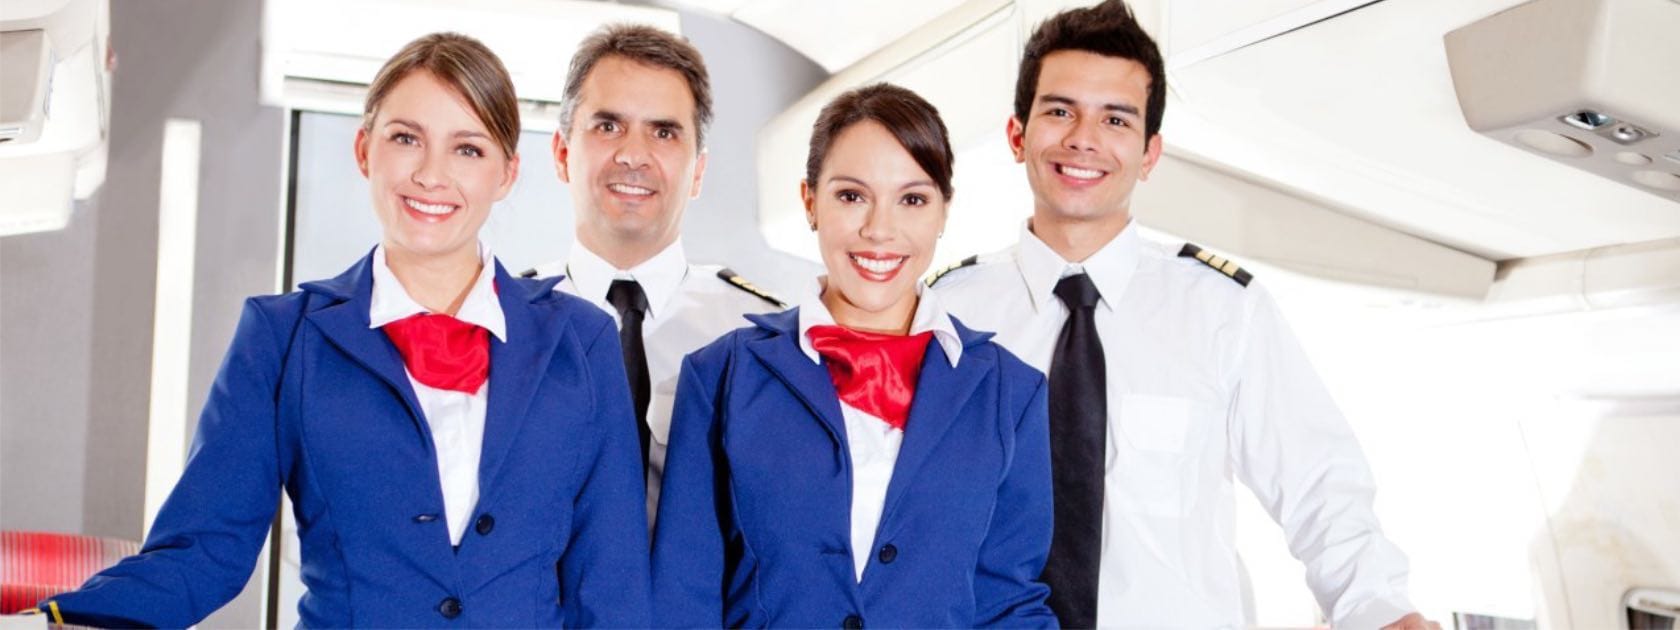 A group of flight attendants smiling to welcome passengers on board.  